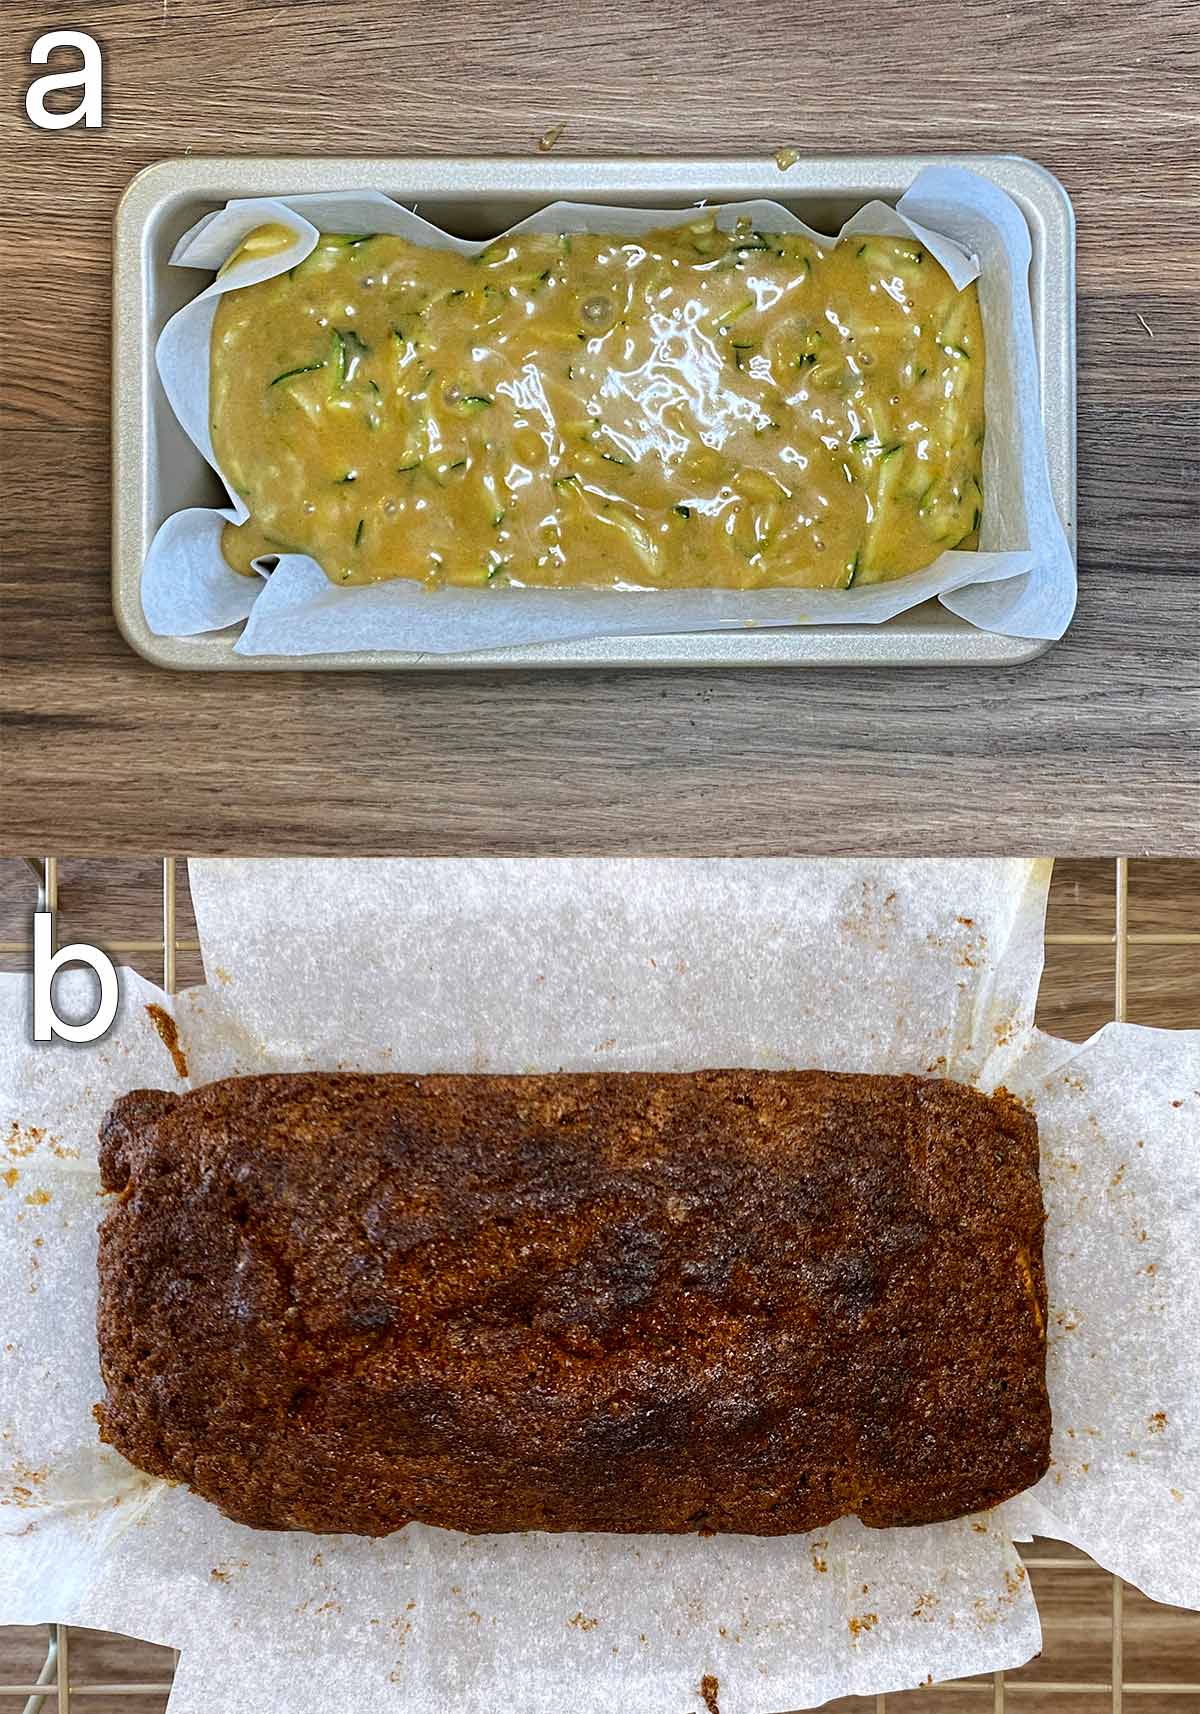 The cake batter poured into a lined loaf tin, then cooked.